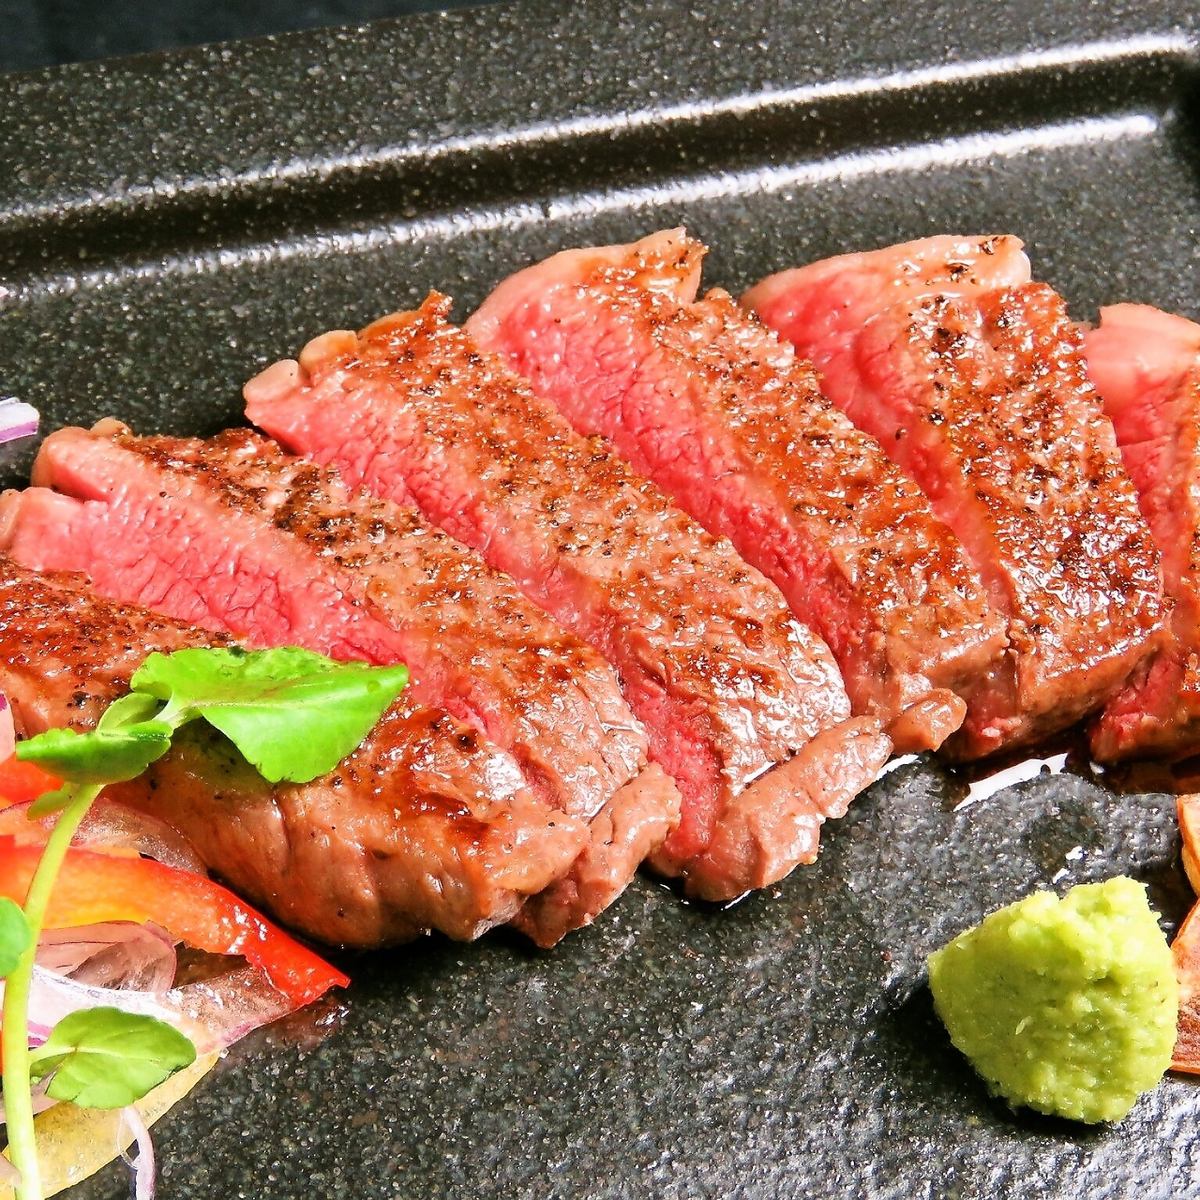 Full of meat dishes, including a course with "selected Awa beef steak"!